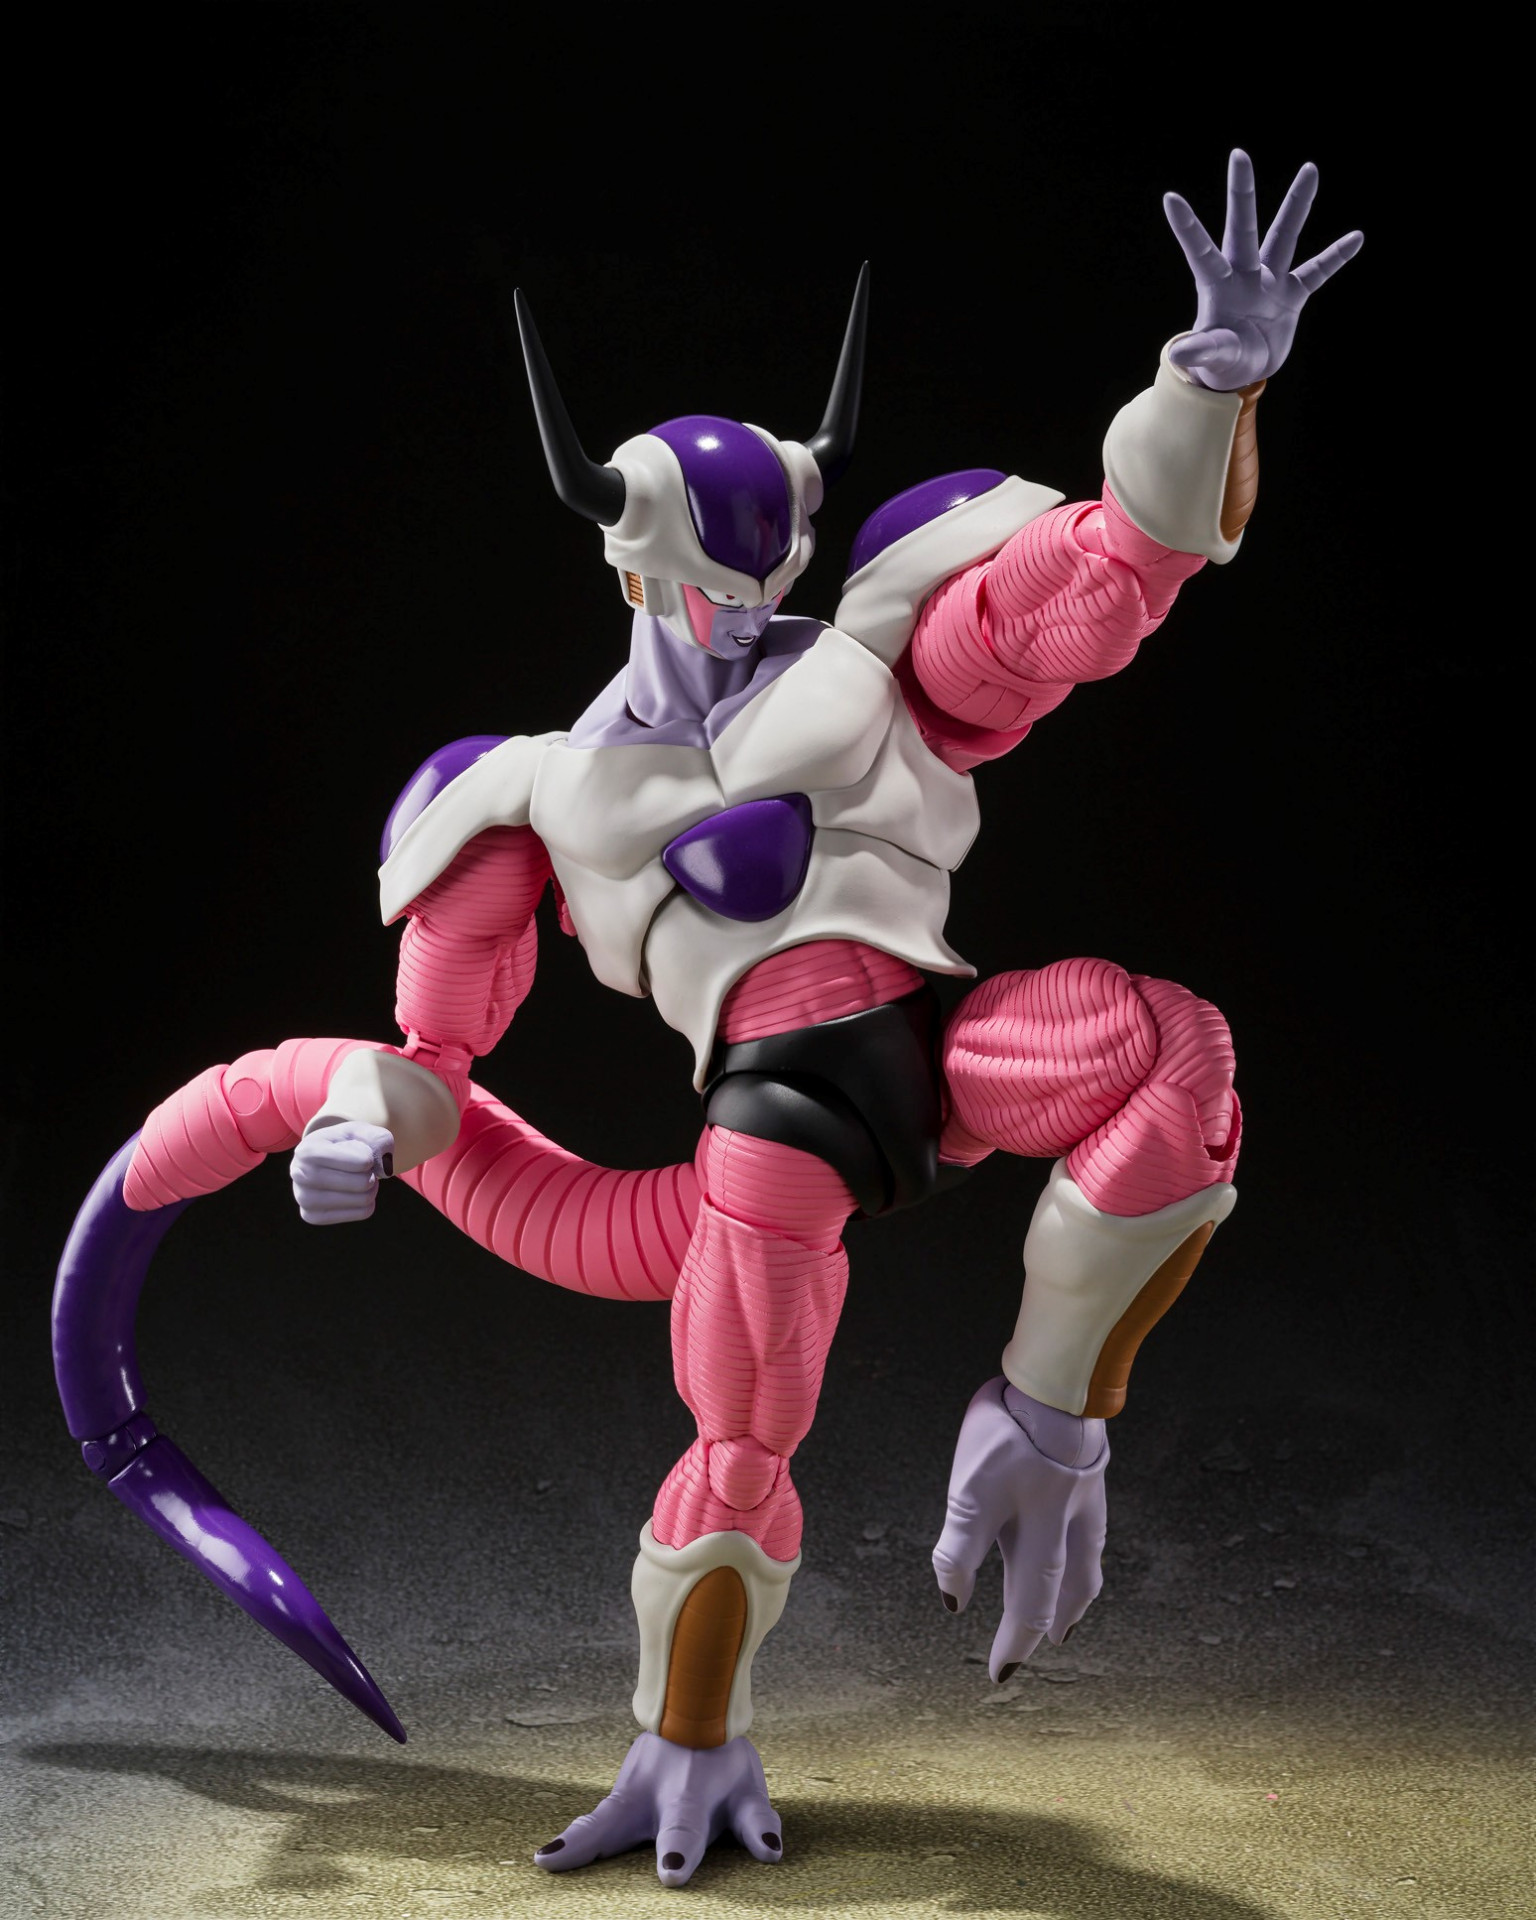 Second Form Frieza Invades the  Series!] | DRAGON BALL OFFICIAL  SITE